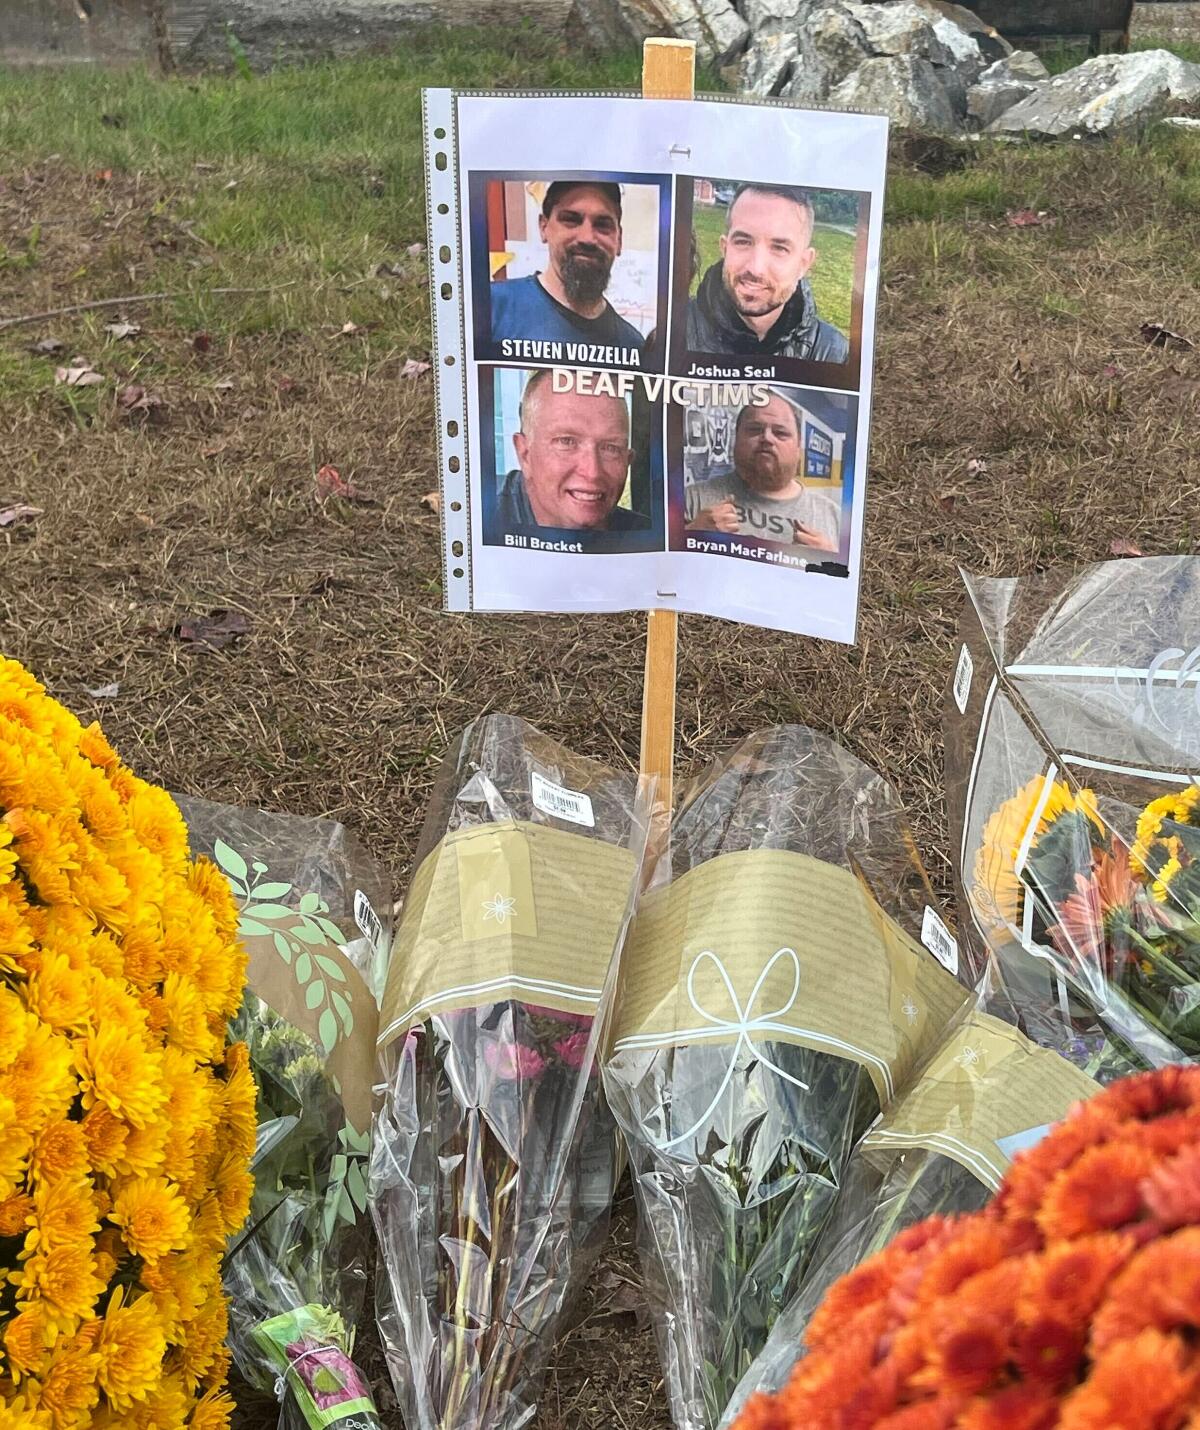 A memorial for the victims was in the mass shooting in Lewiston that were deaf.